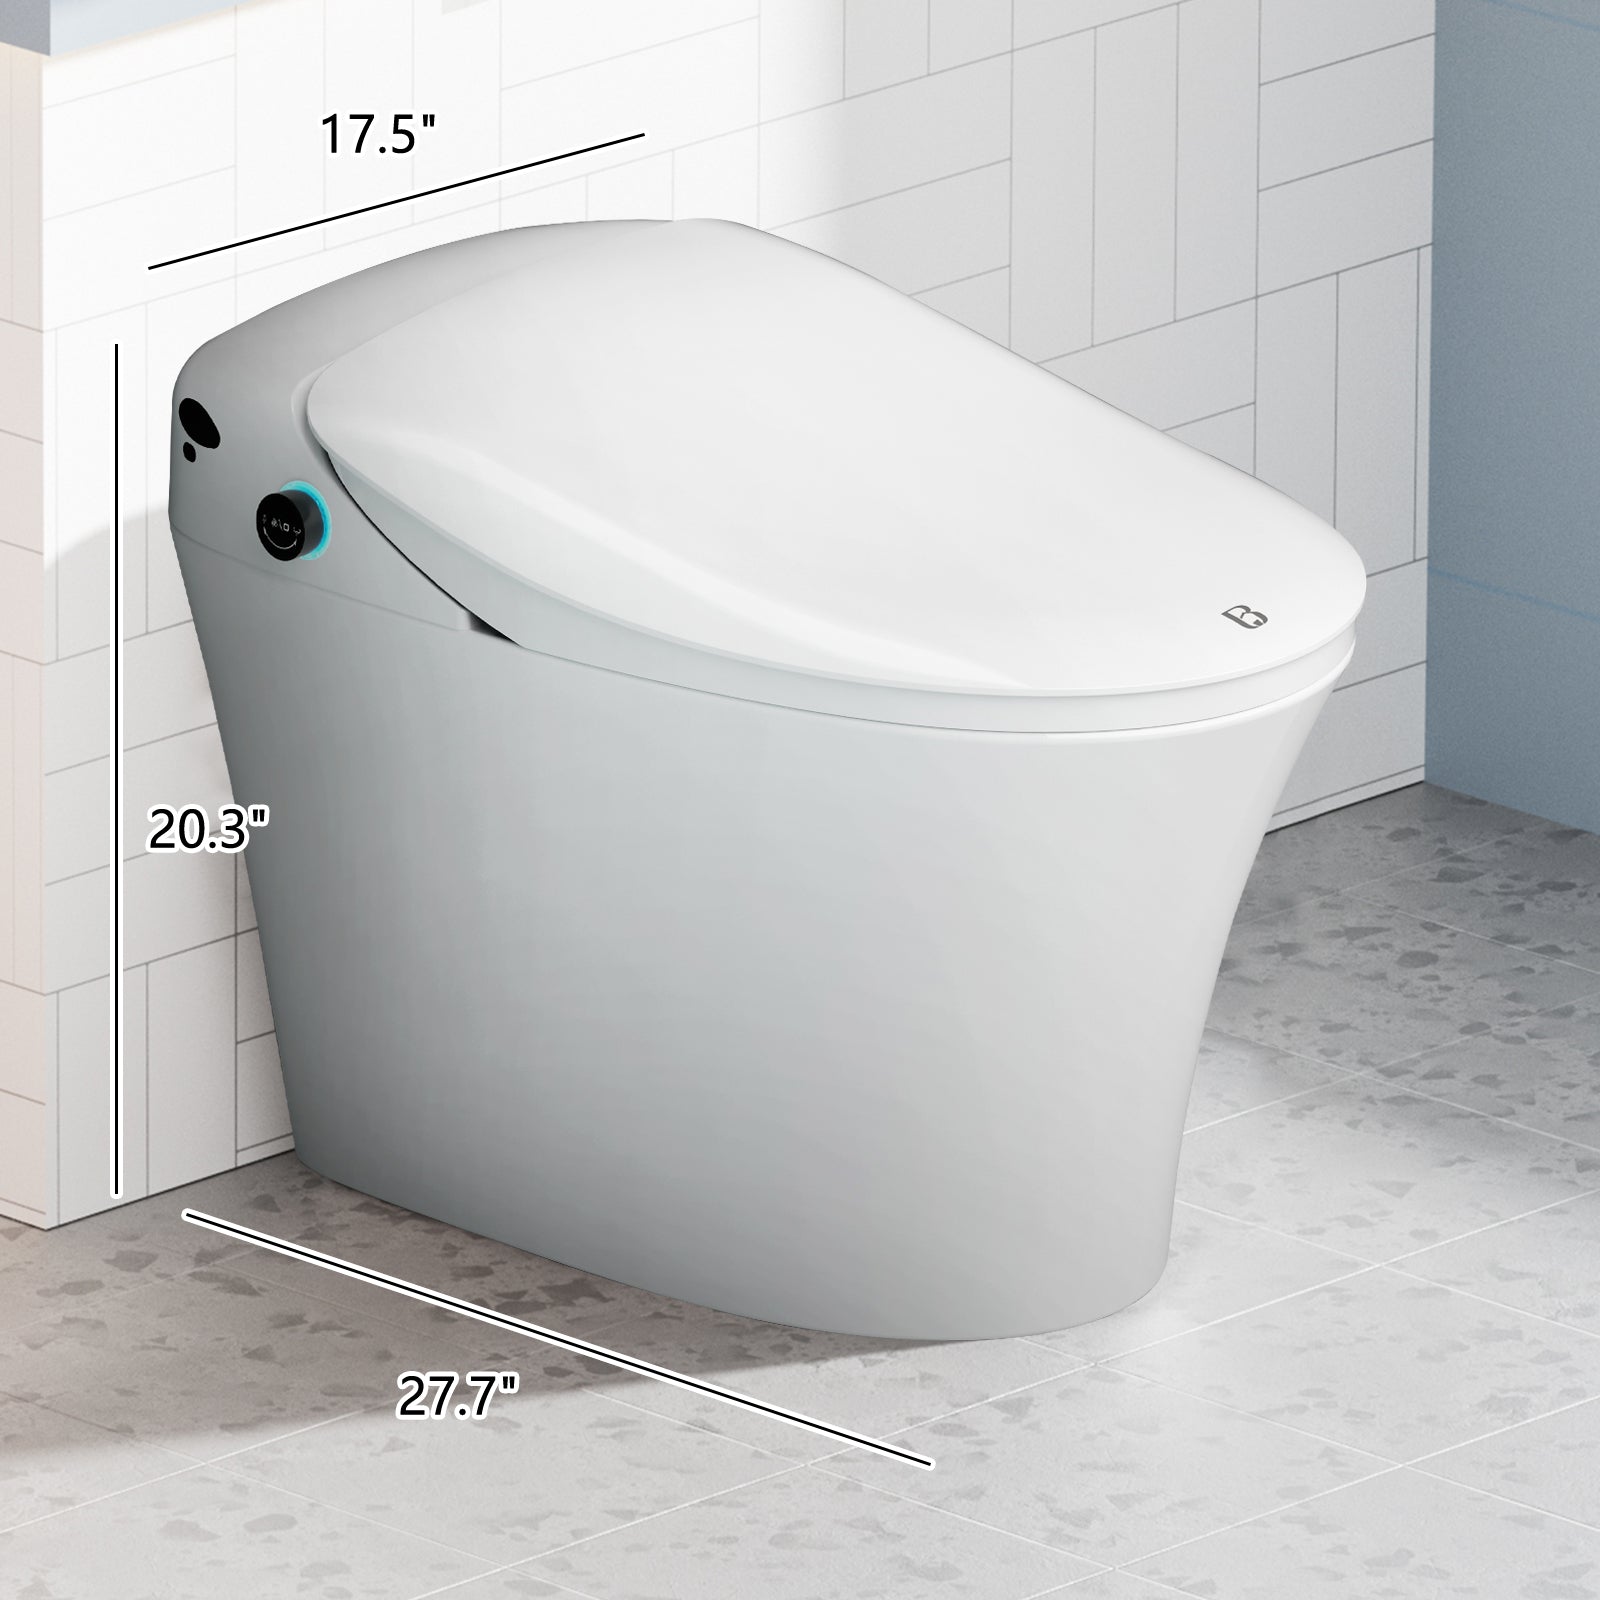 mart Toilet with Wireless Remote, Multiple Spray Modes, Heated Seat with Warm Water Sprayer and Dryer, Foot Sensor Modern Toilet Bidet Automatic Flush Toilet